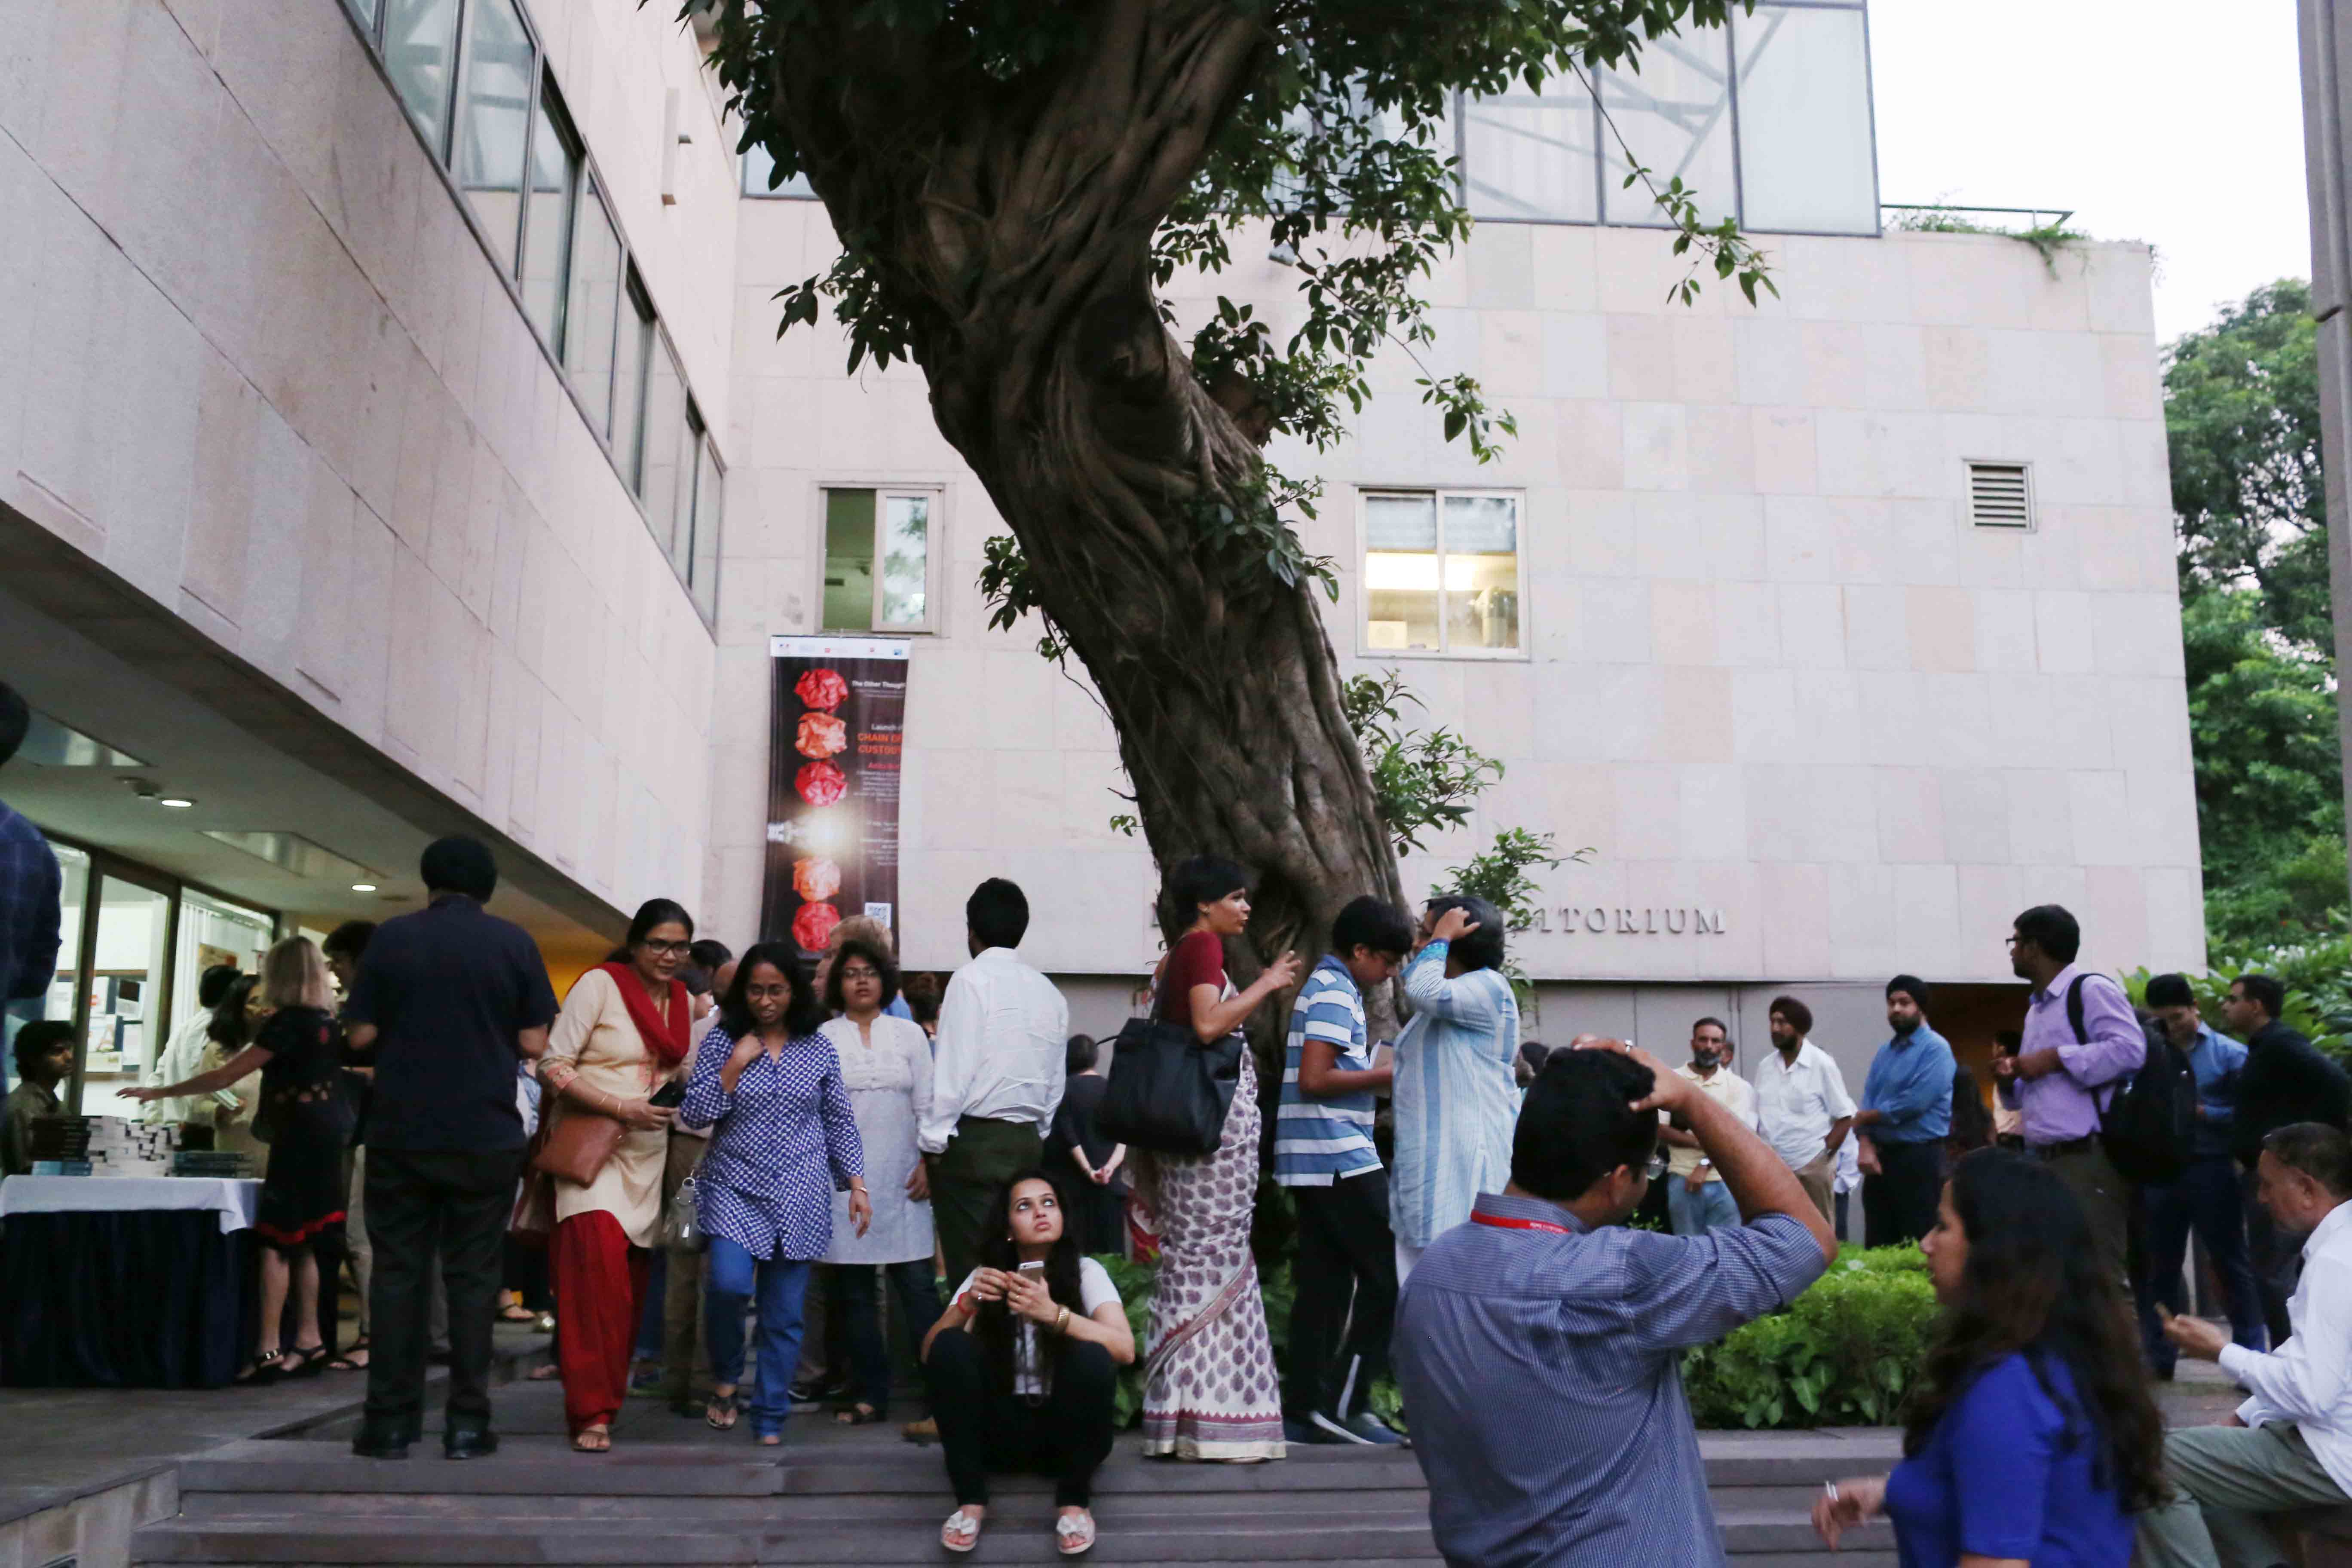 City News - The Magnificent and Much-Loved 'Tribal Tree' of Alliance Française is No More, Lodhi Estate